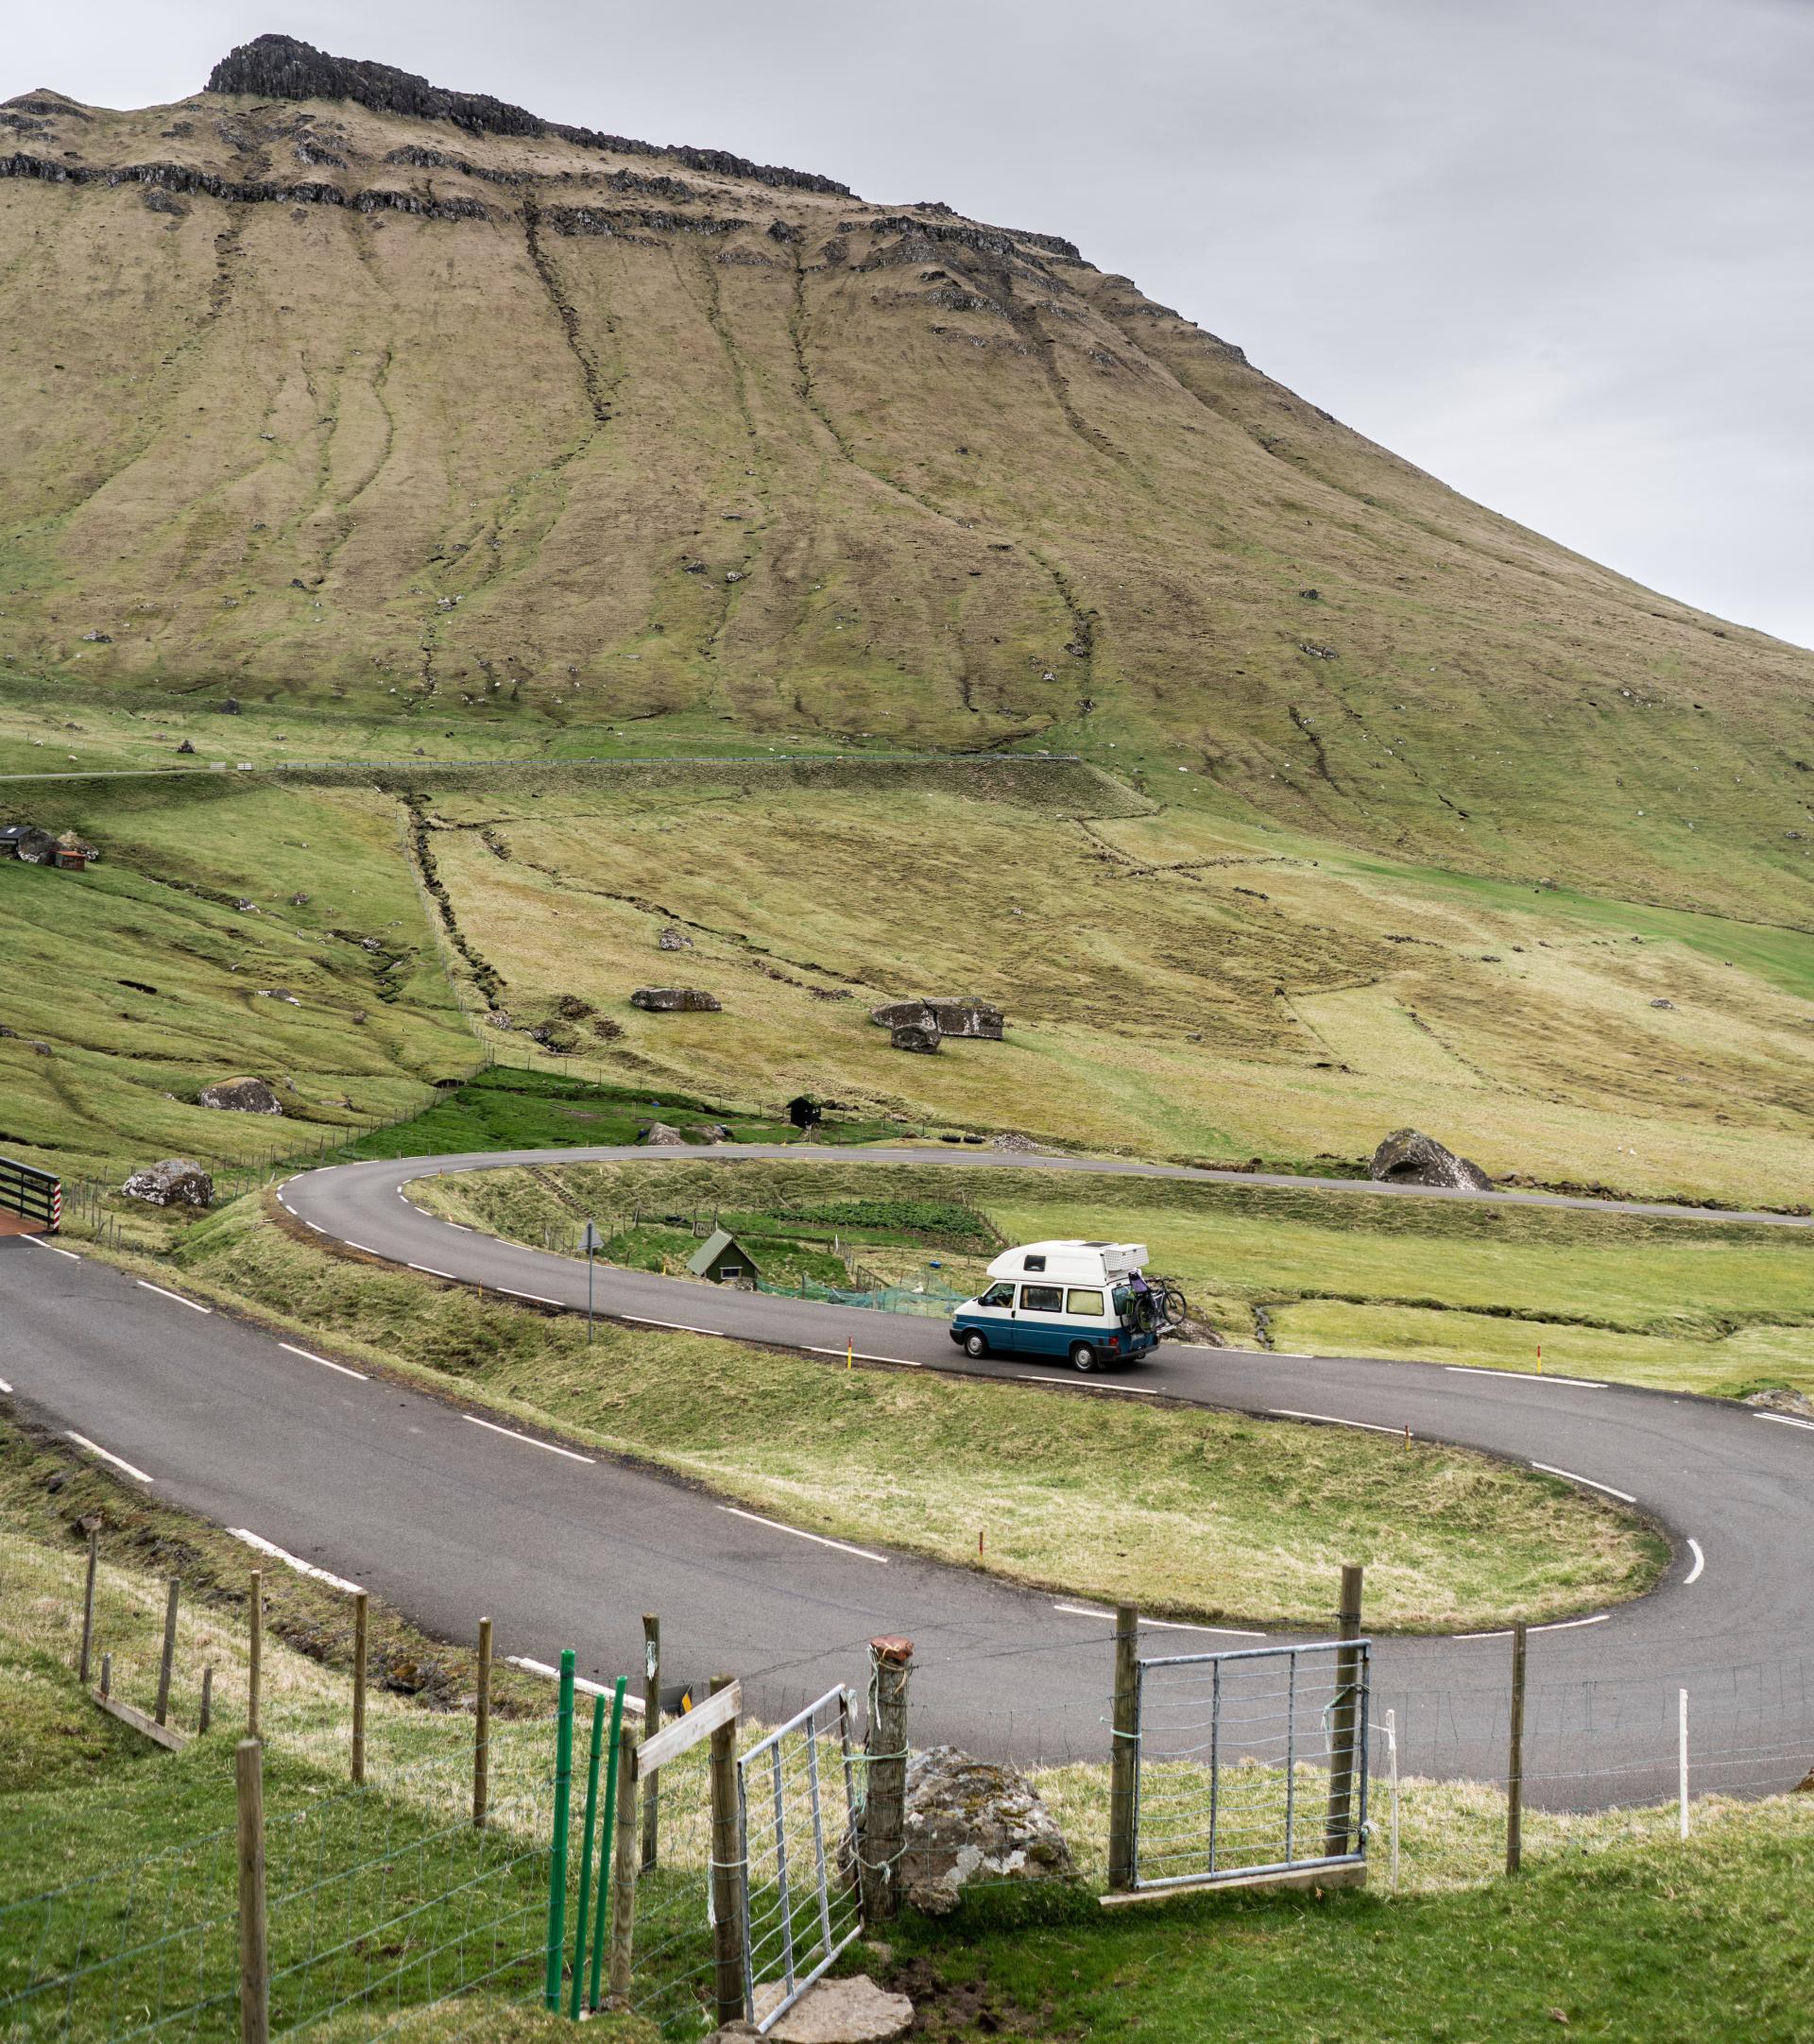  "We traveled around Faroe Islands with our van. That was an amazing adventure, the roads are just perfect ups and downs and the camping places are really cozy and well located."
Photo by @giuliegiordi